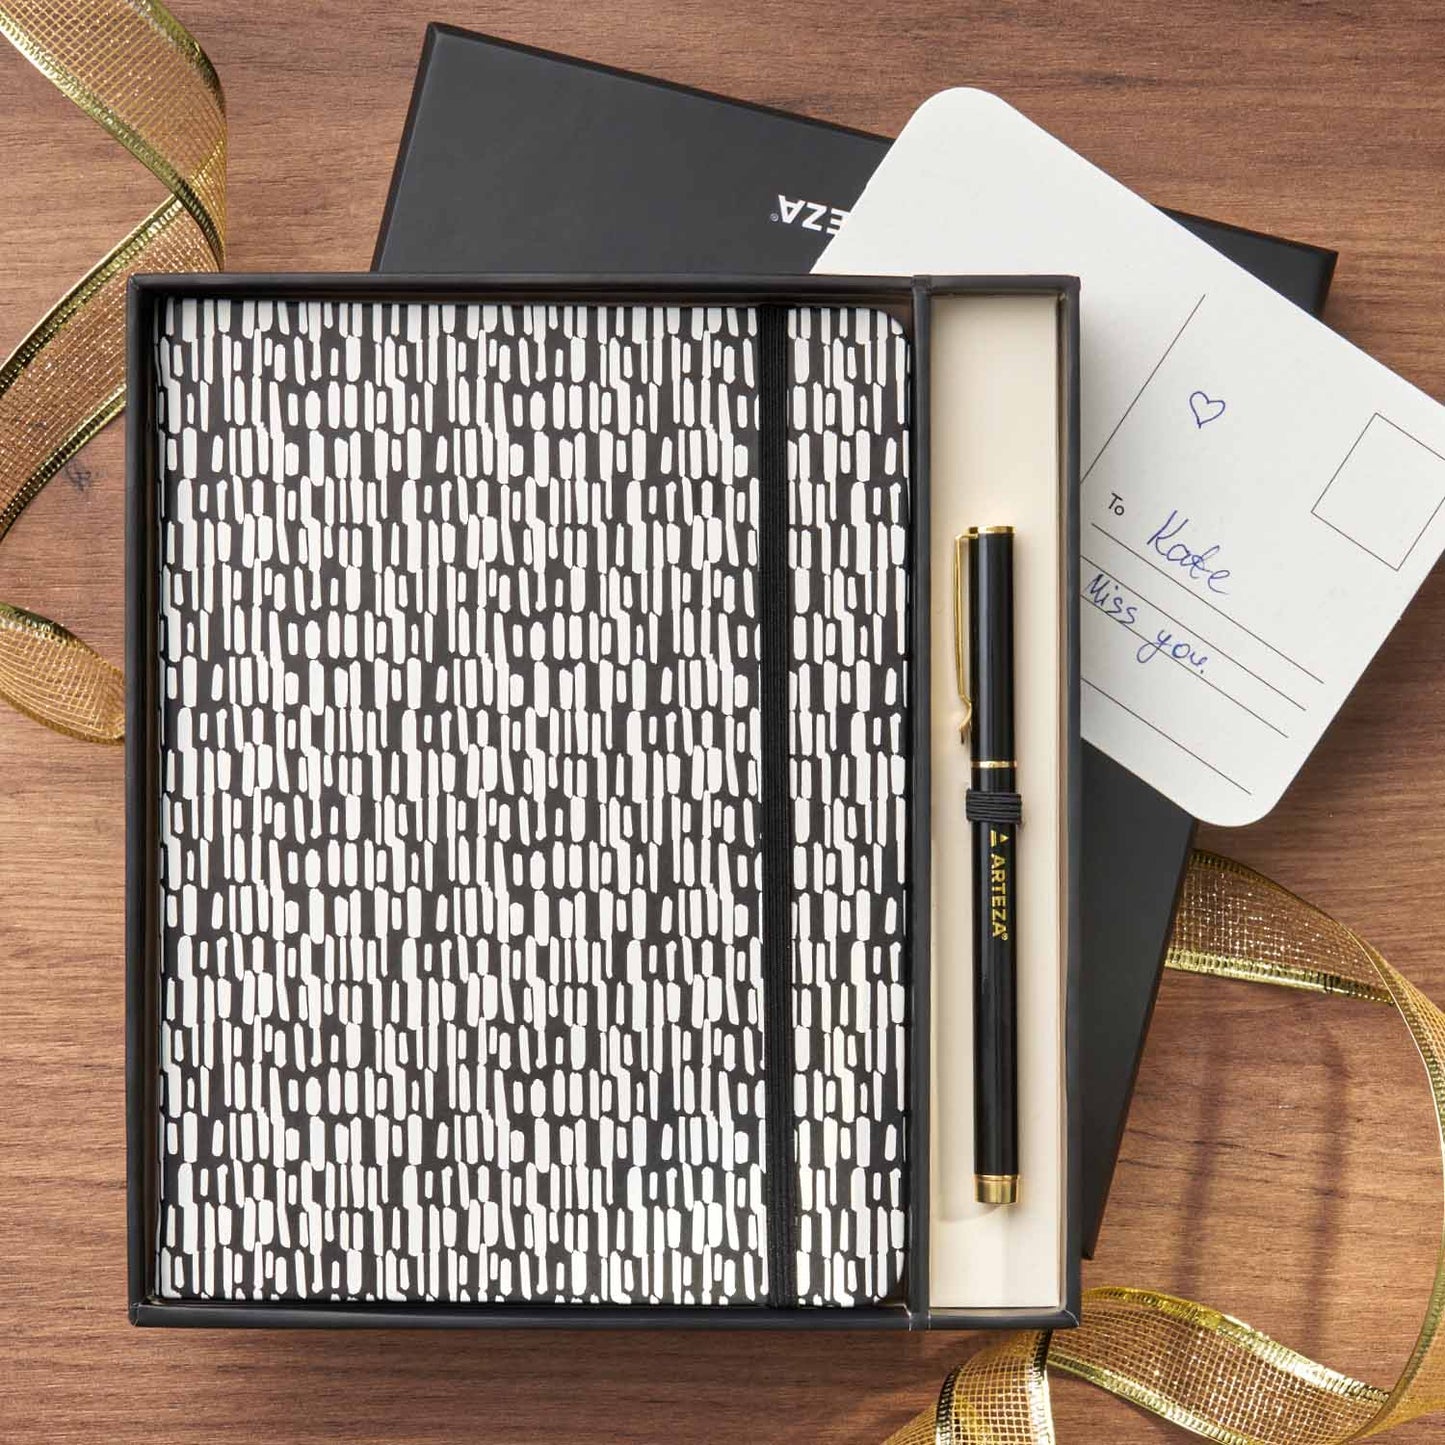 Arteza Journal Gift Set, Pack of 2, 6x8 Inches,70-Sheet Notebooks with Double-Sided Lined and Dotted Paper, Journal Holder, and 1 Black Ink Pen, Offic